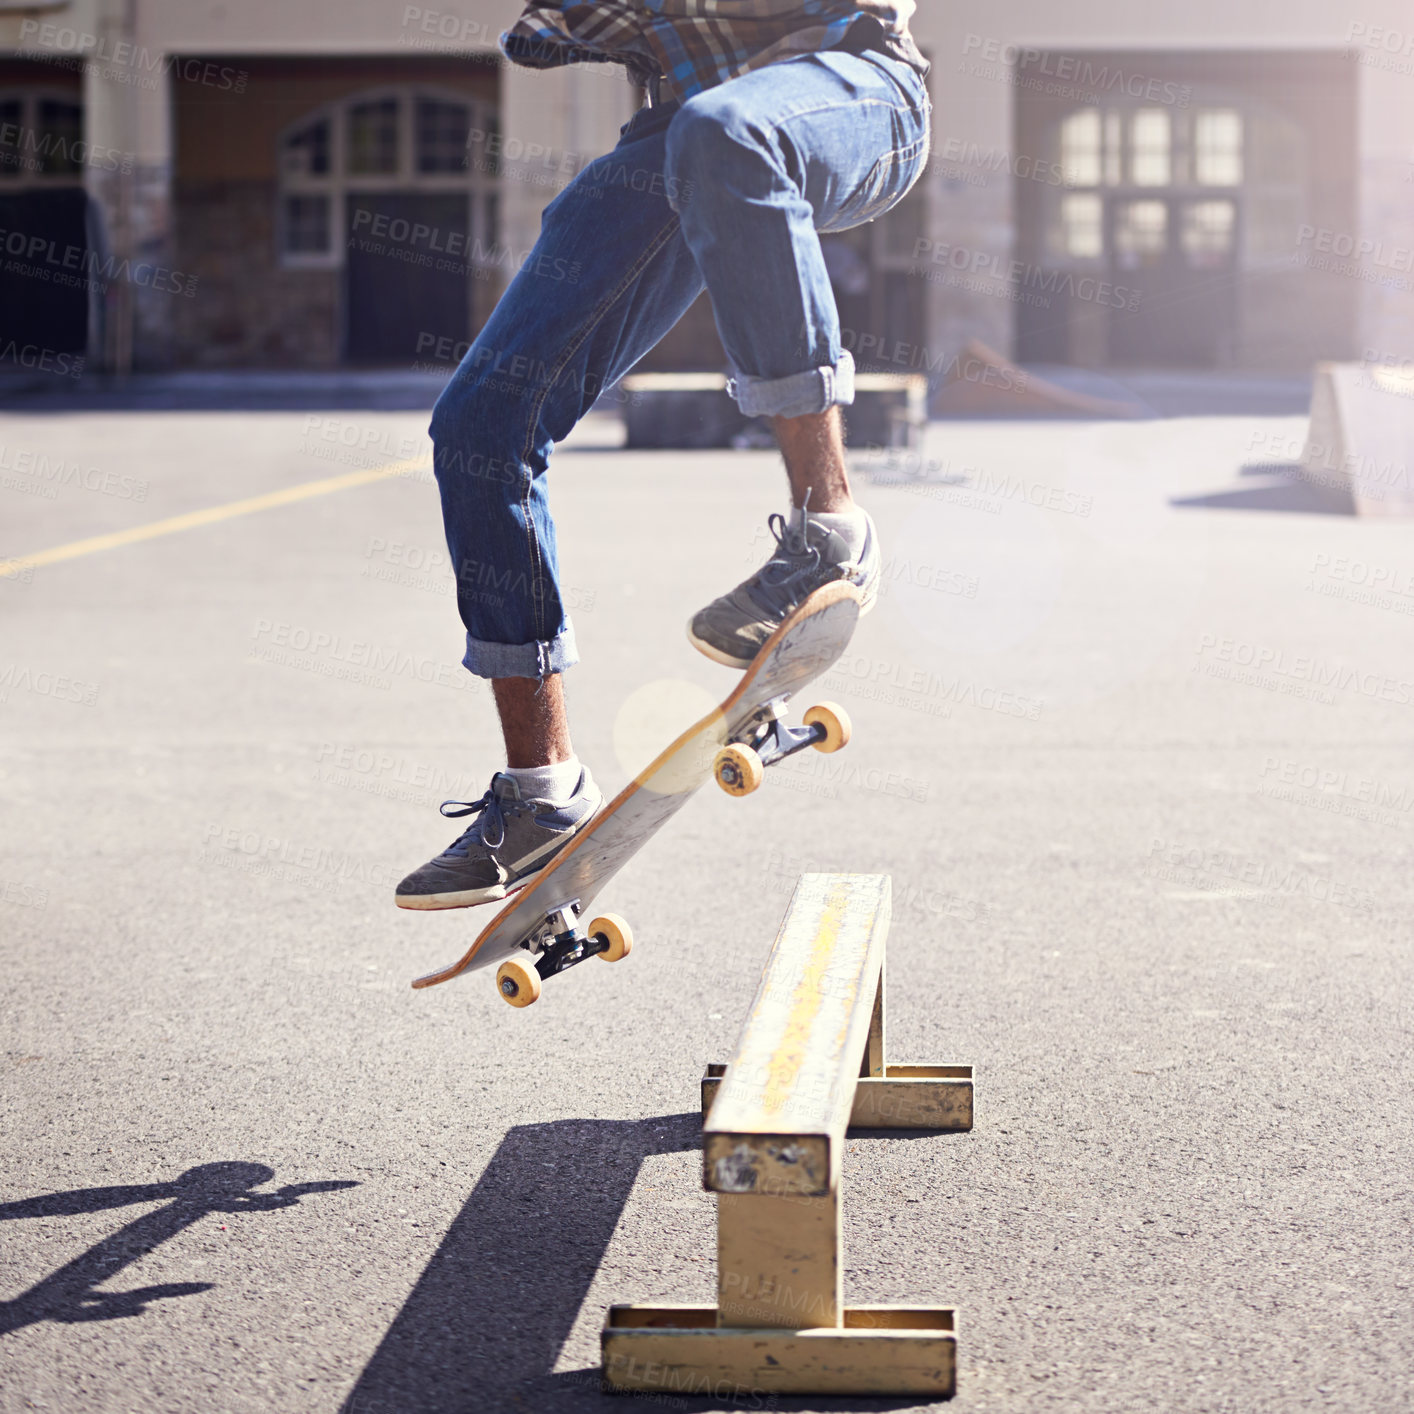 Buy stock photo Cropped shot of a young man doing a skateboarding trick